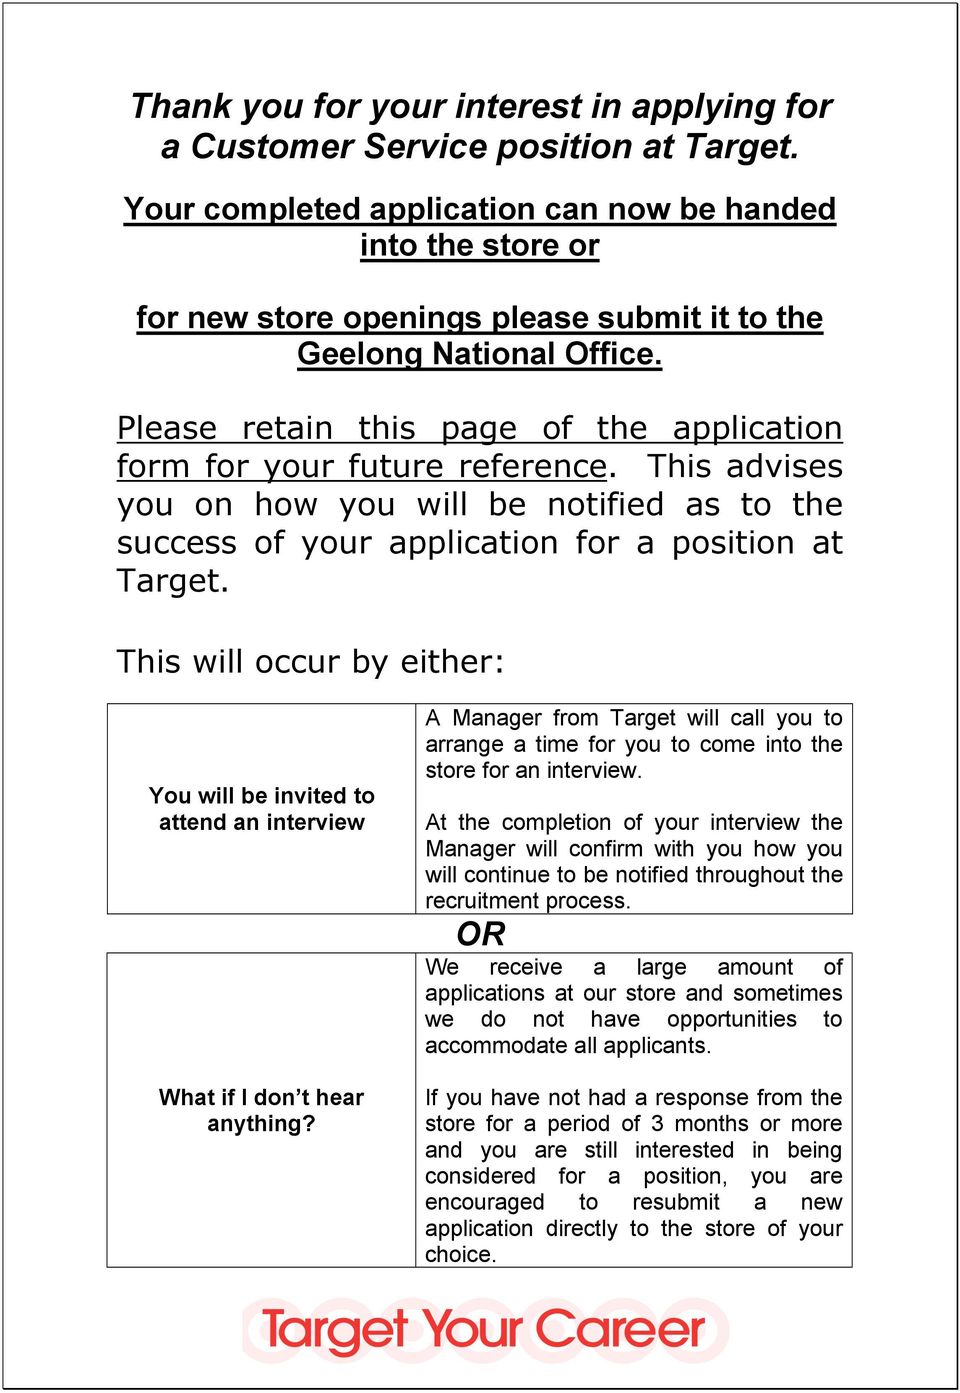 Please retain this page of the application form for your future reference. This advises you on how you will be notified as to the success of your application for a position at Target.